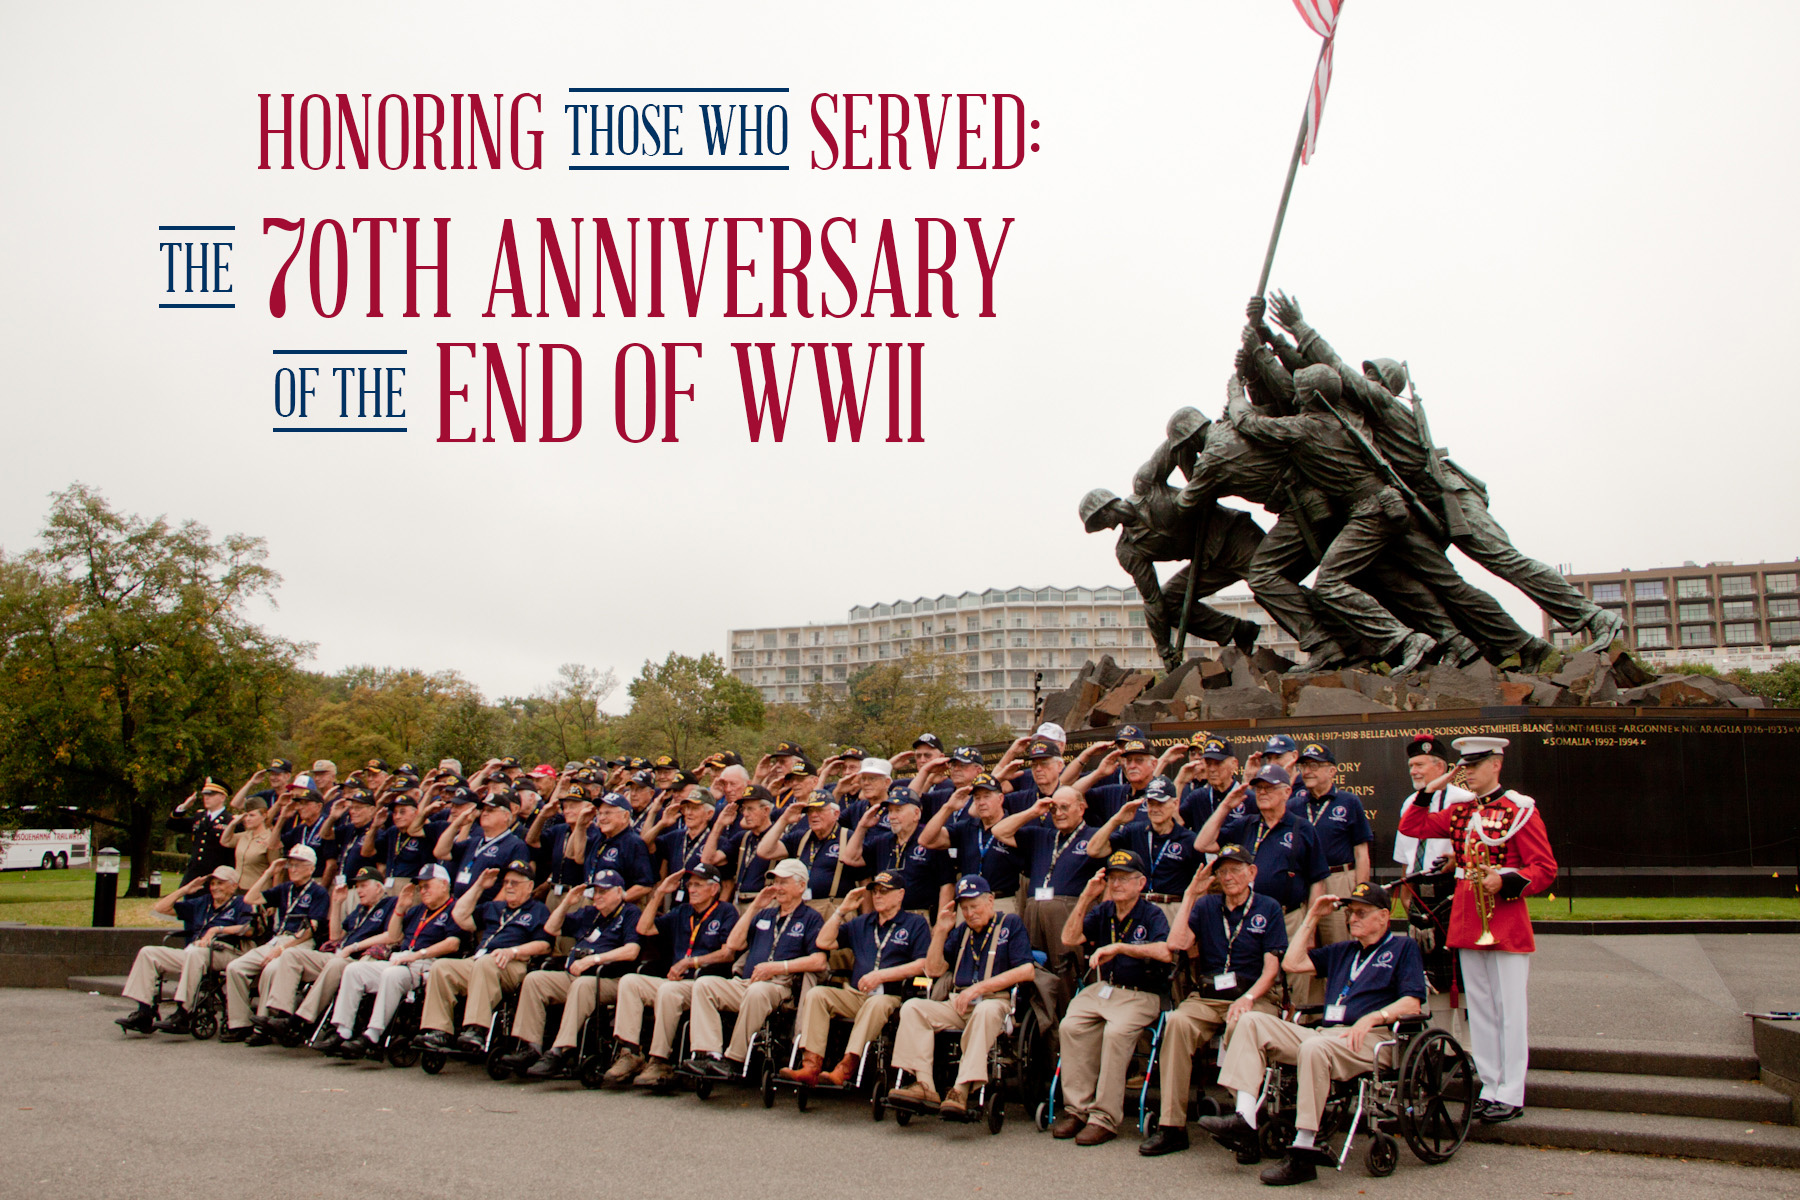 Honoring Those Who Served: the 70th Enniversary of the End of World War II